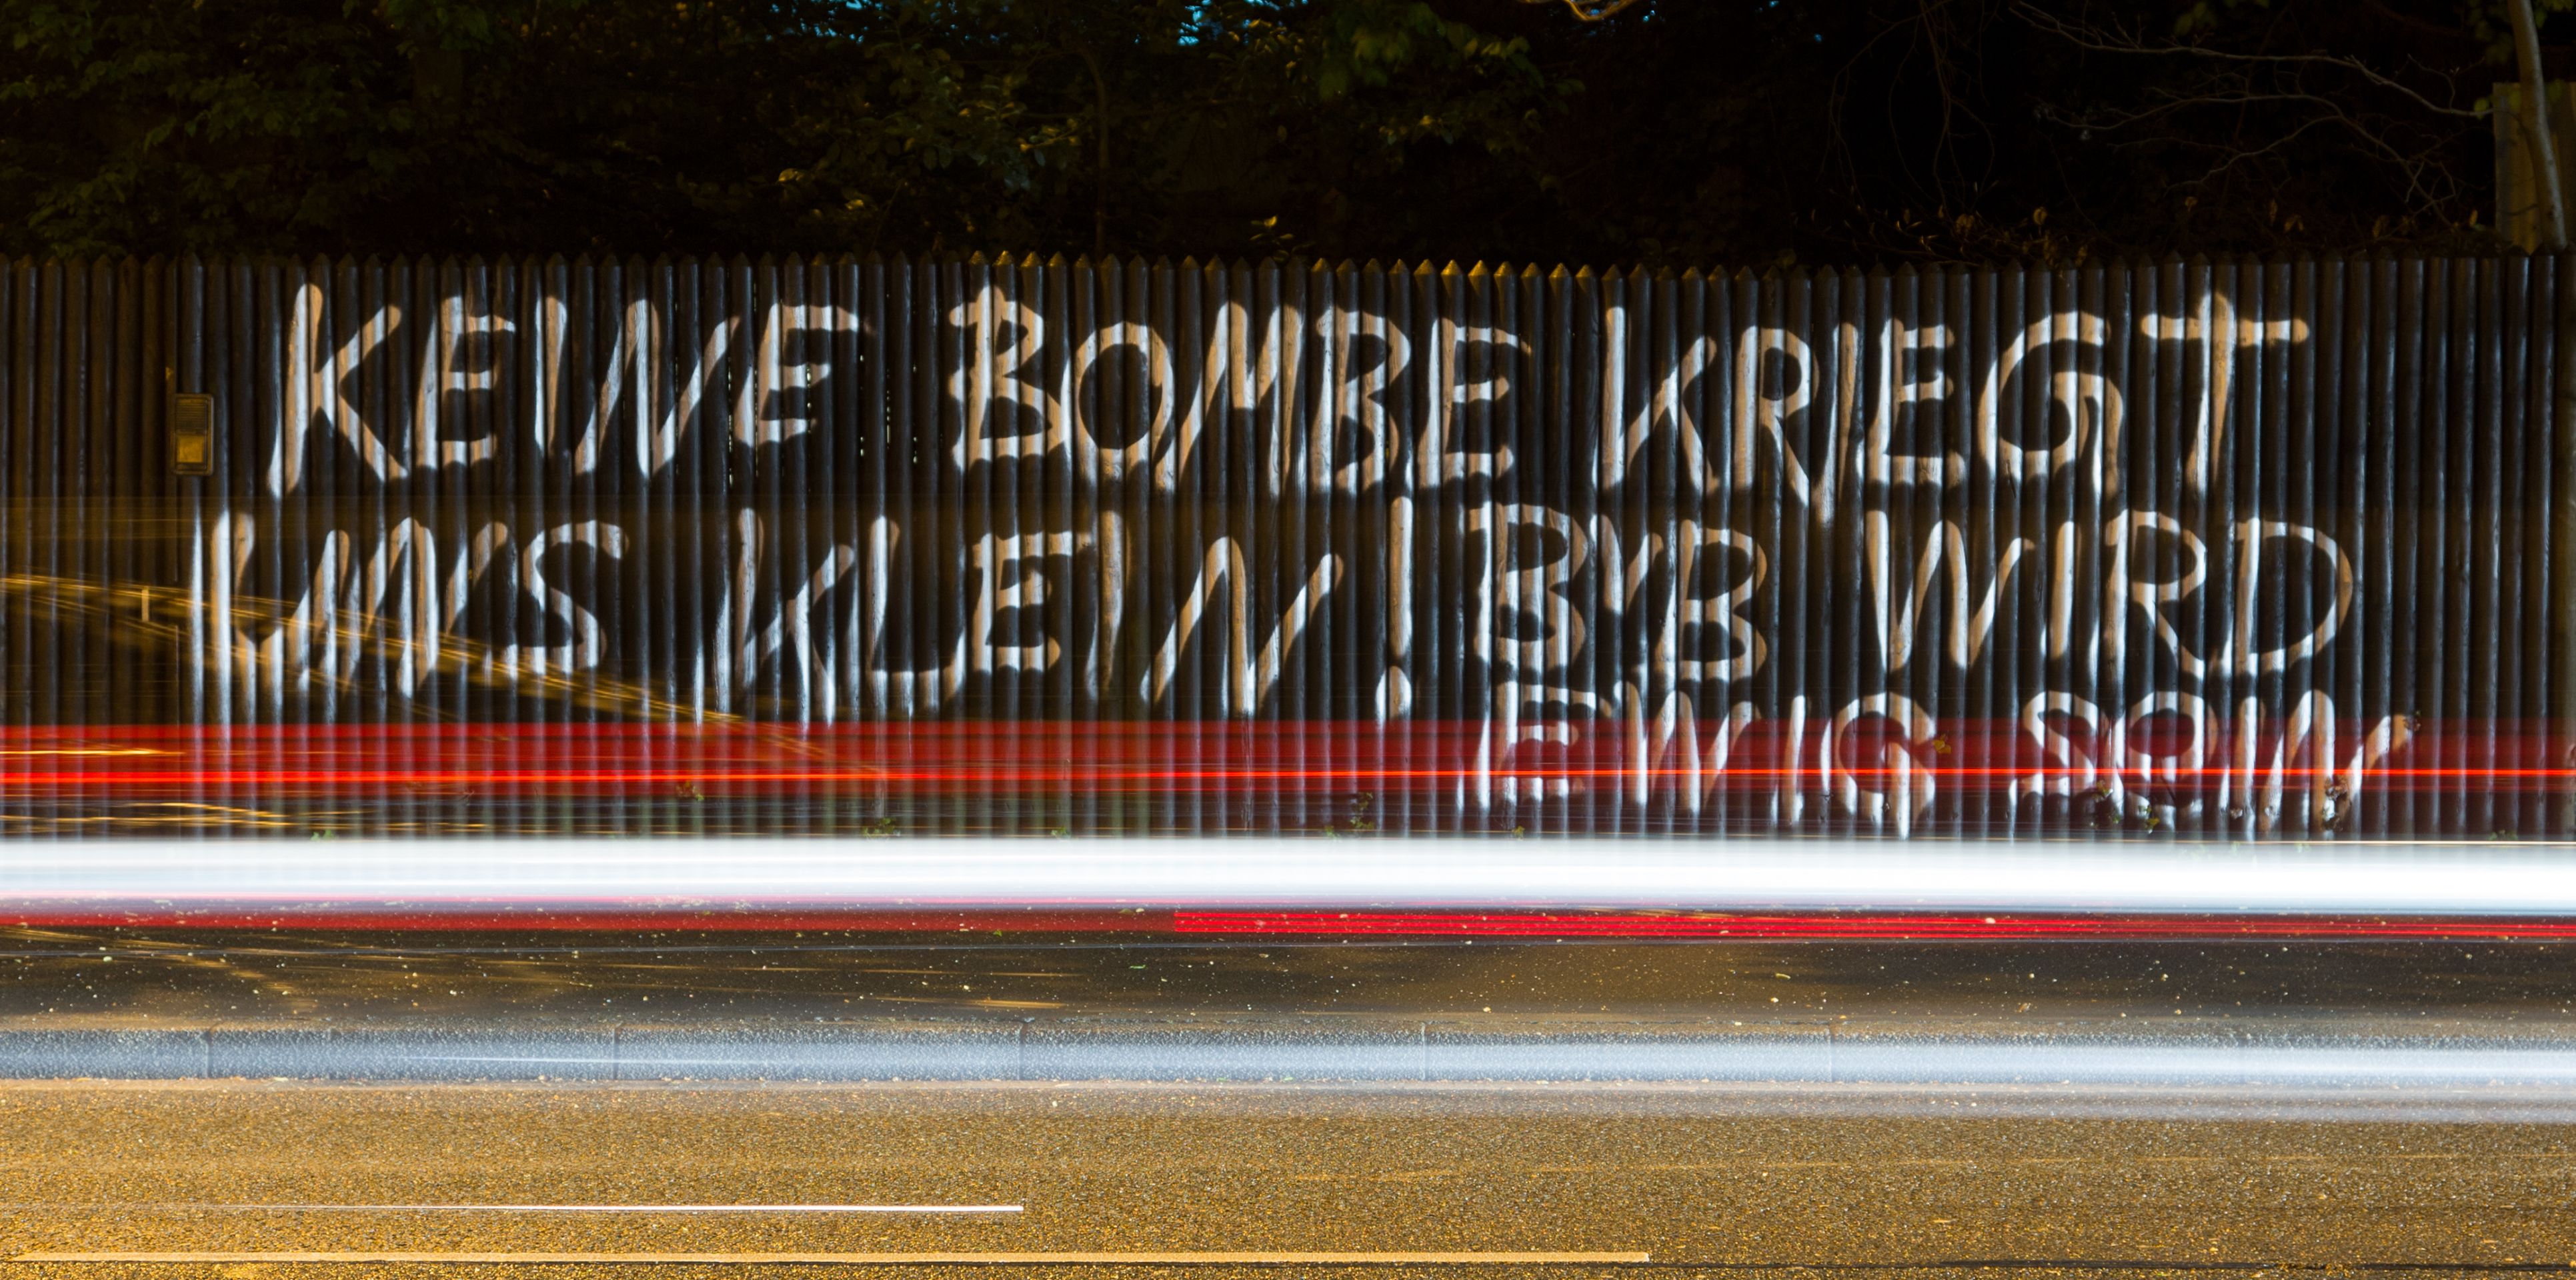 'Keine Bombe kriegt uns klein! BVB wird ewig sein' (lit. 'No bomb will bring us down! BVB lasts forever') is written on a fence in Dortmund, Germany, 12 April 2017. Three explosive devices detonated next to the team bus of the Borussia Dortmund soccer team in the evening of 11 April. The Champions League match in Dortmund was cancelled after the explosive attack involving two injured. Photo: Friso Gentsch/dpa